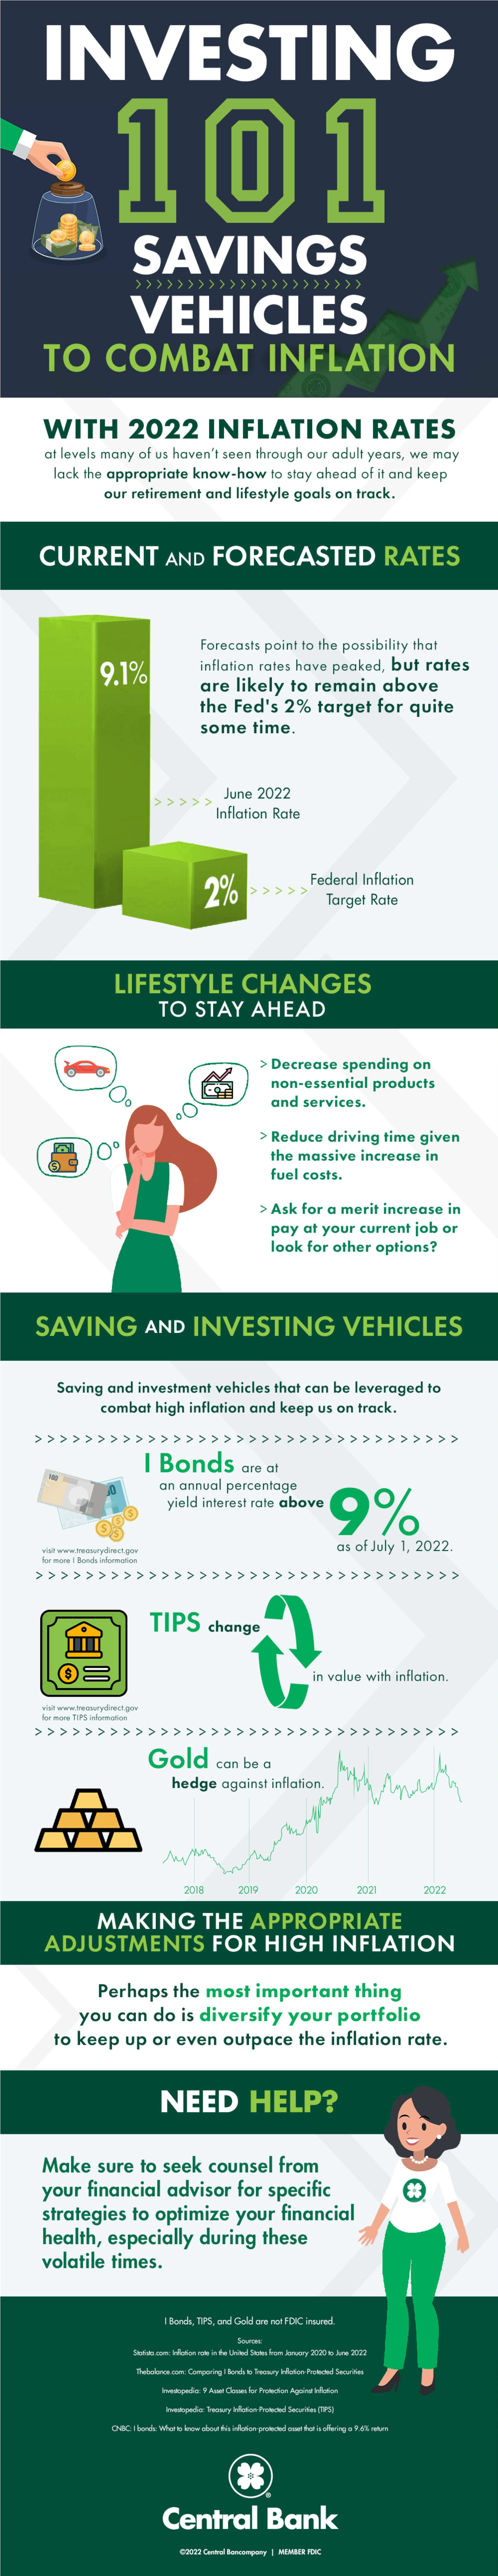 infographic of investing and savings vehicles